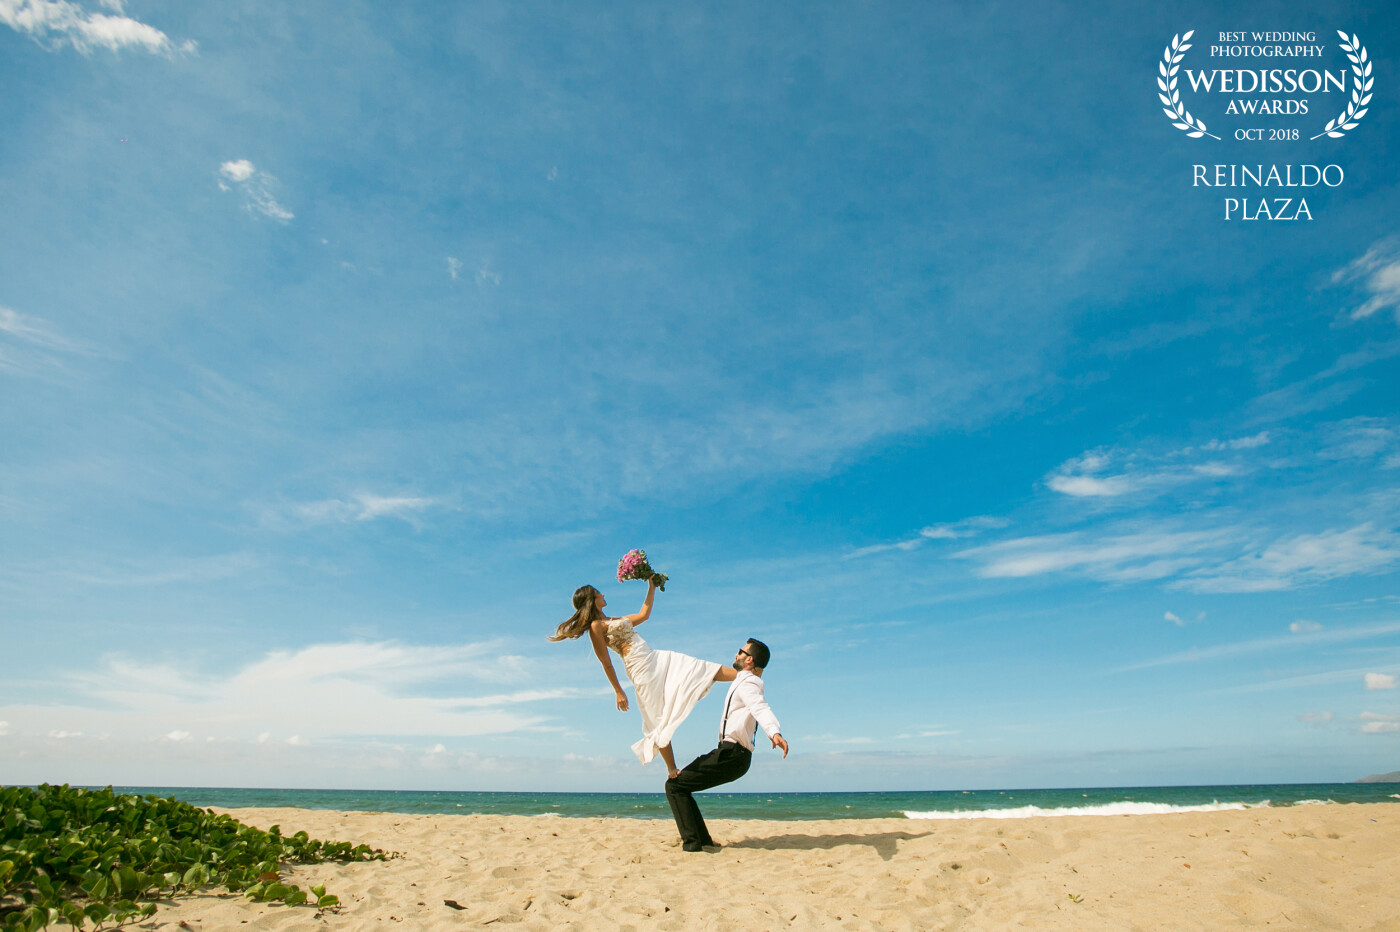 This photo was taken in La Sabana Beach in Venezuela, we where waiting for the sun to go a bit down but we want to make some photos in that time, when the bride says "i have an idea for a photo" then she start climbing her husband and make that pose for this picture.